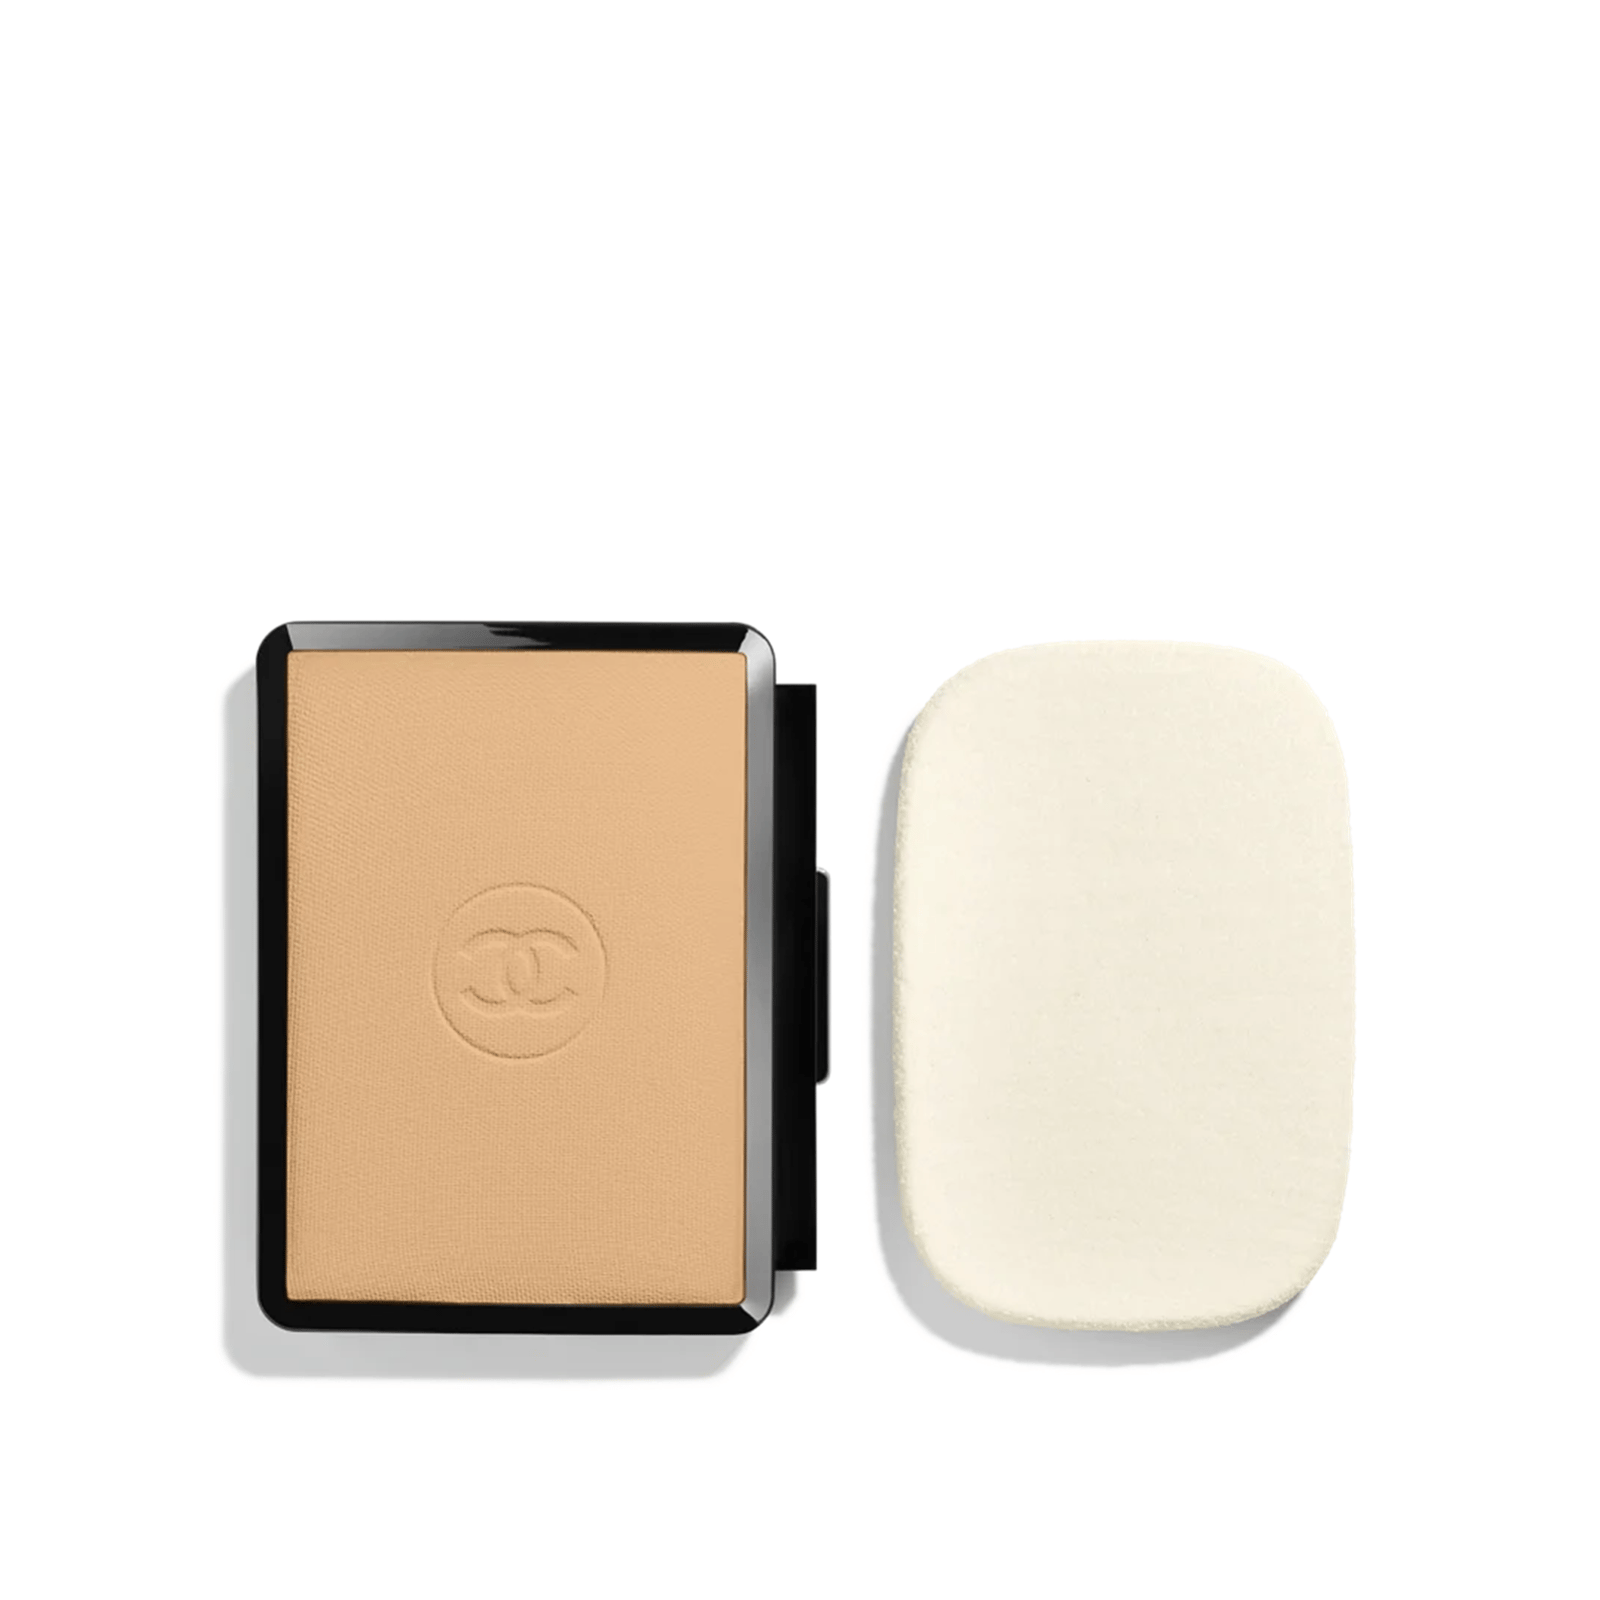 CHANEL Ultra Le Teint Flawless Finish Compact Foundation B70 Refill 13g